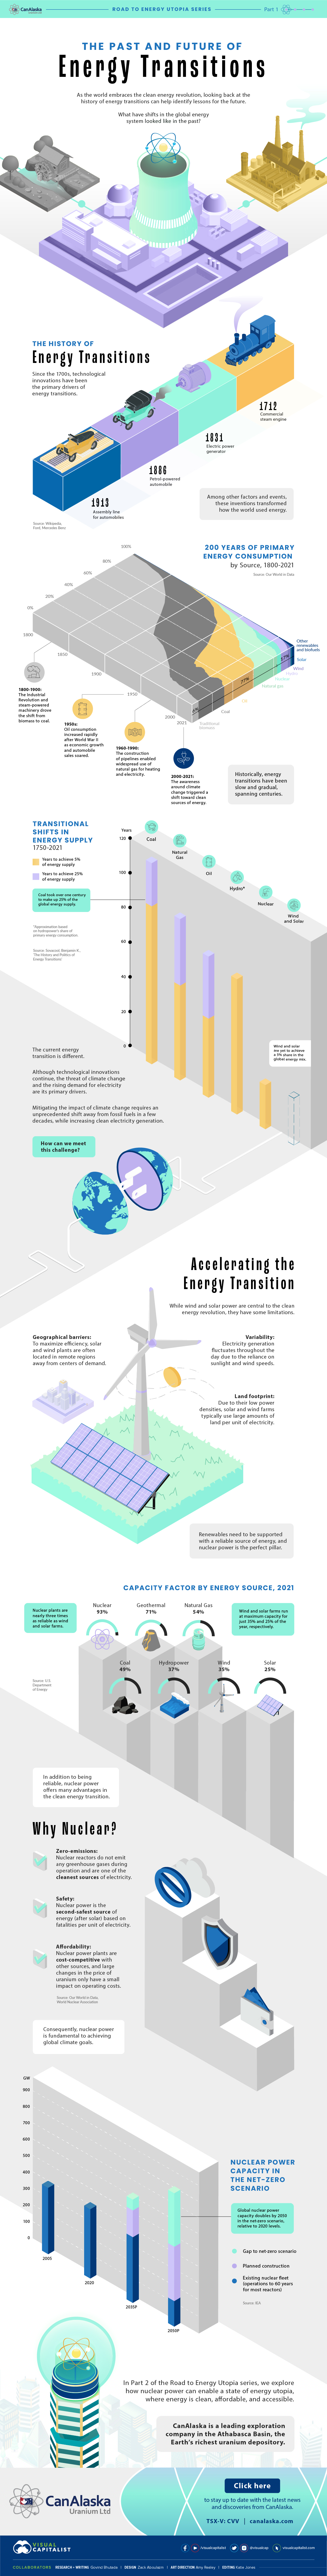 the past and future of energy transitions